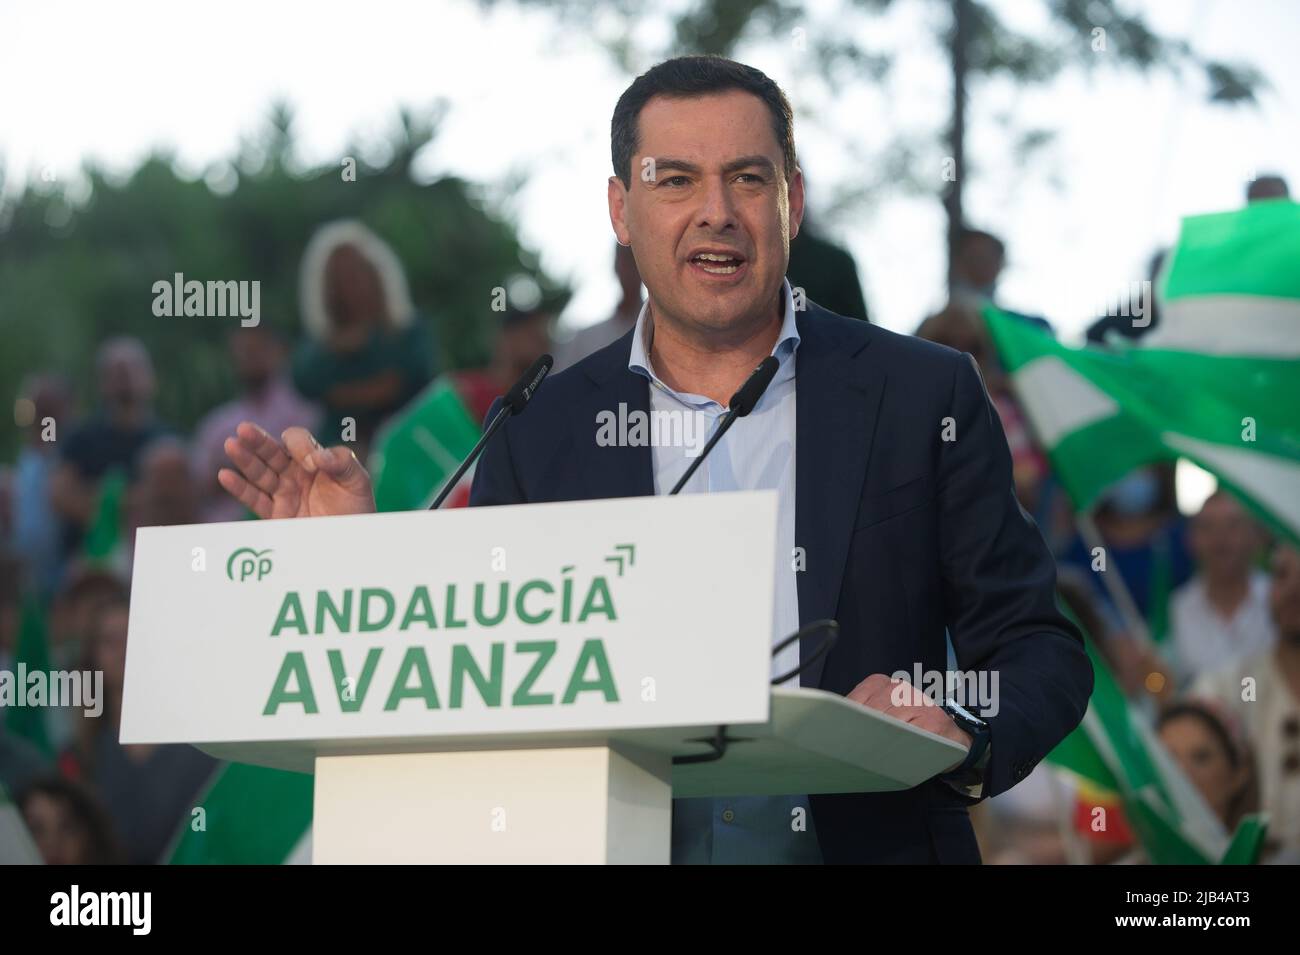 Andalusian president Juanma Moreno, and candidate for the reelection to lead the Andalusian regional government is seen delivering a speech during the start of the Andalusian electoral campaign. After announcing regional elections in Andalusia are to be held on 19th June, the main political parties have started holding events and rallies in different cities in Andalusia. Several media polls place the Andalusian Popular Party in the lead, despite the rise of the Spanish far-right party VOX. Parties on the left of the political spectrum are fragmented Stock Photo